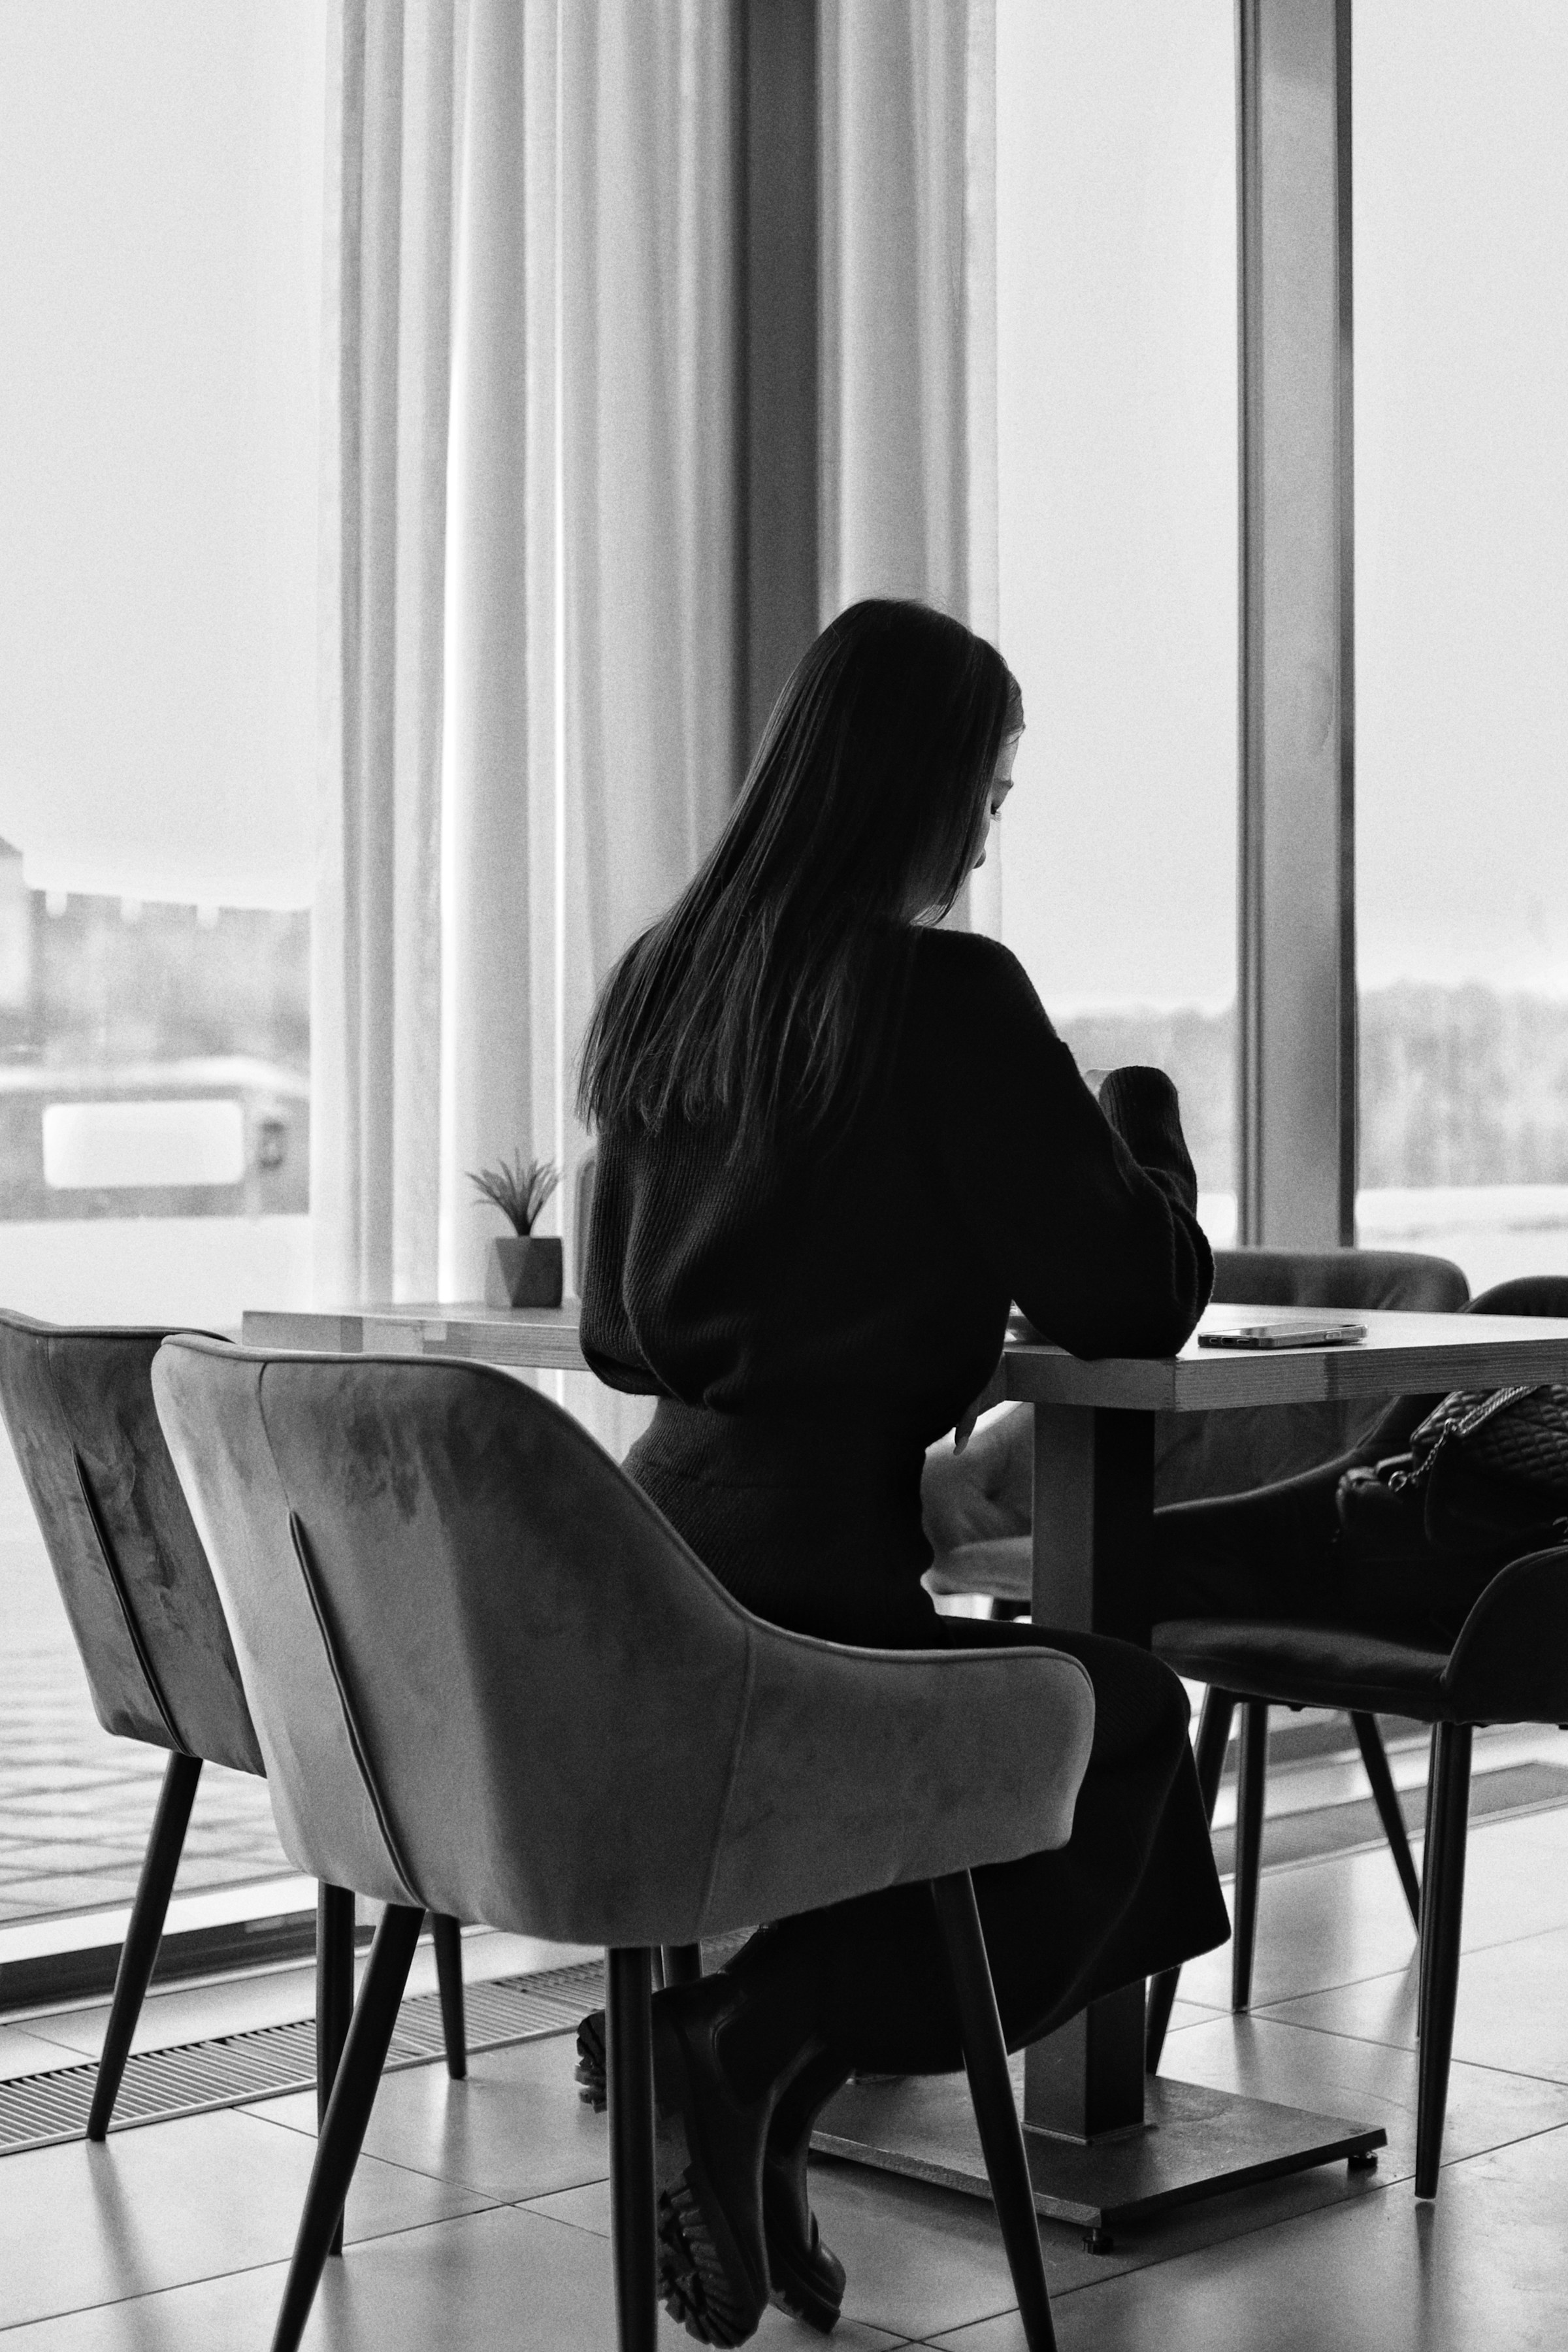 A woman sitting at a table in a restaurant in front of a window | Source: Unsplash